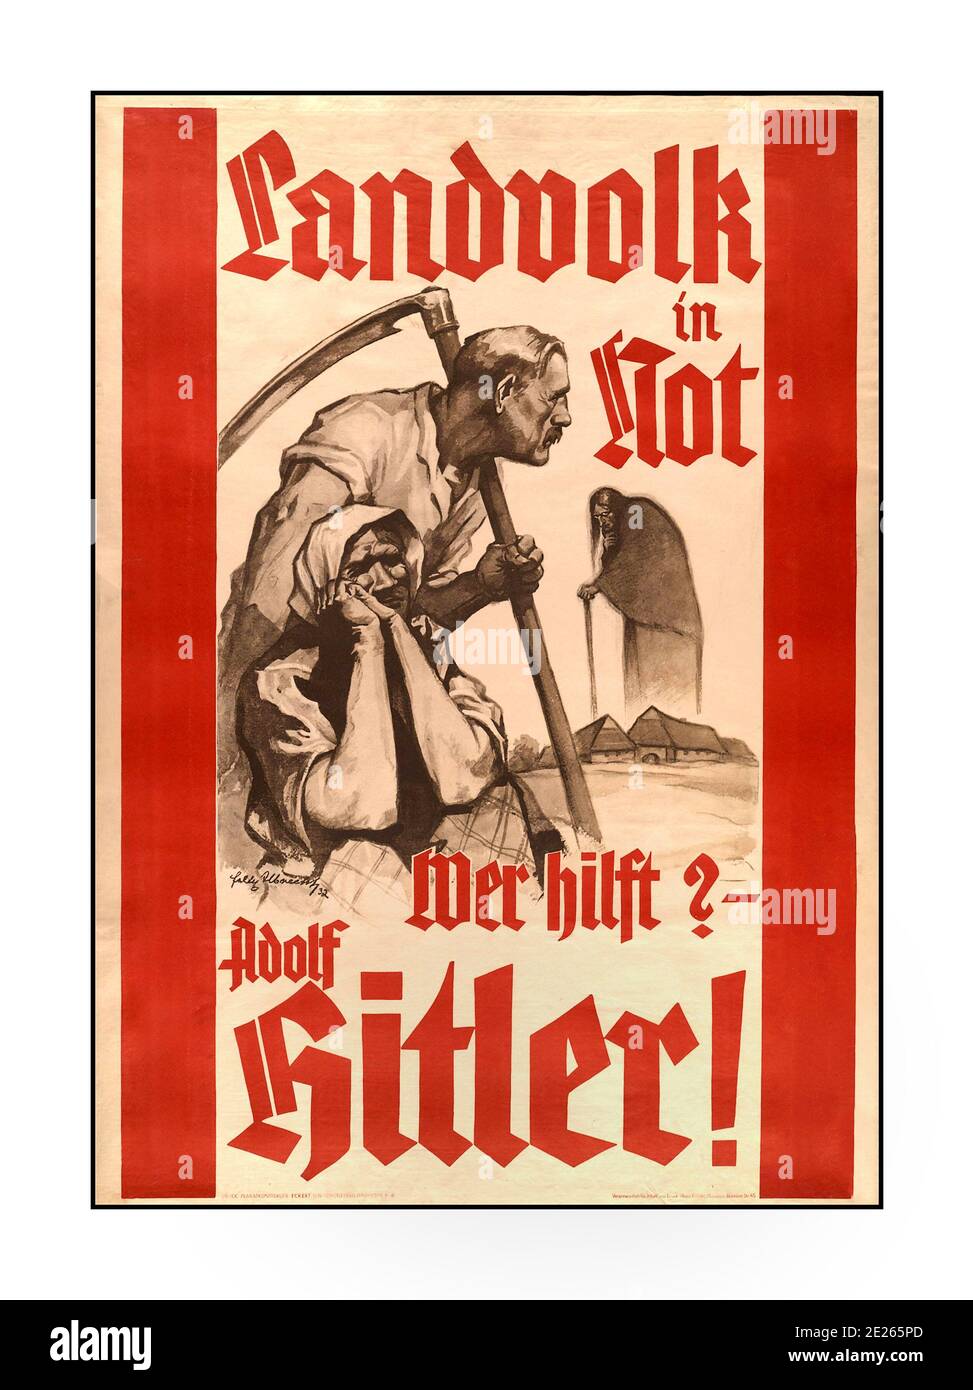 HITLER 1932 Propaganda German election poster ‘Rural people in need, who helps? – Adolf Hitler!’ Nazi Germany NSDAP Election Poster 1930's Stock Photo